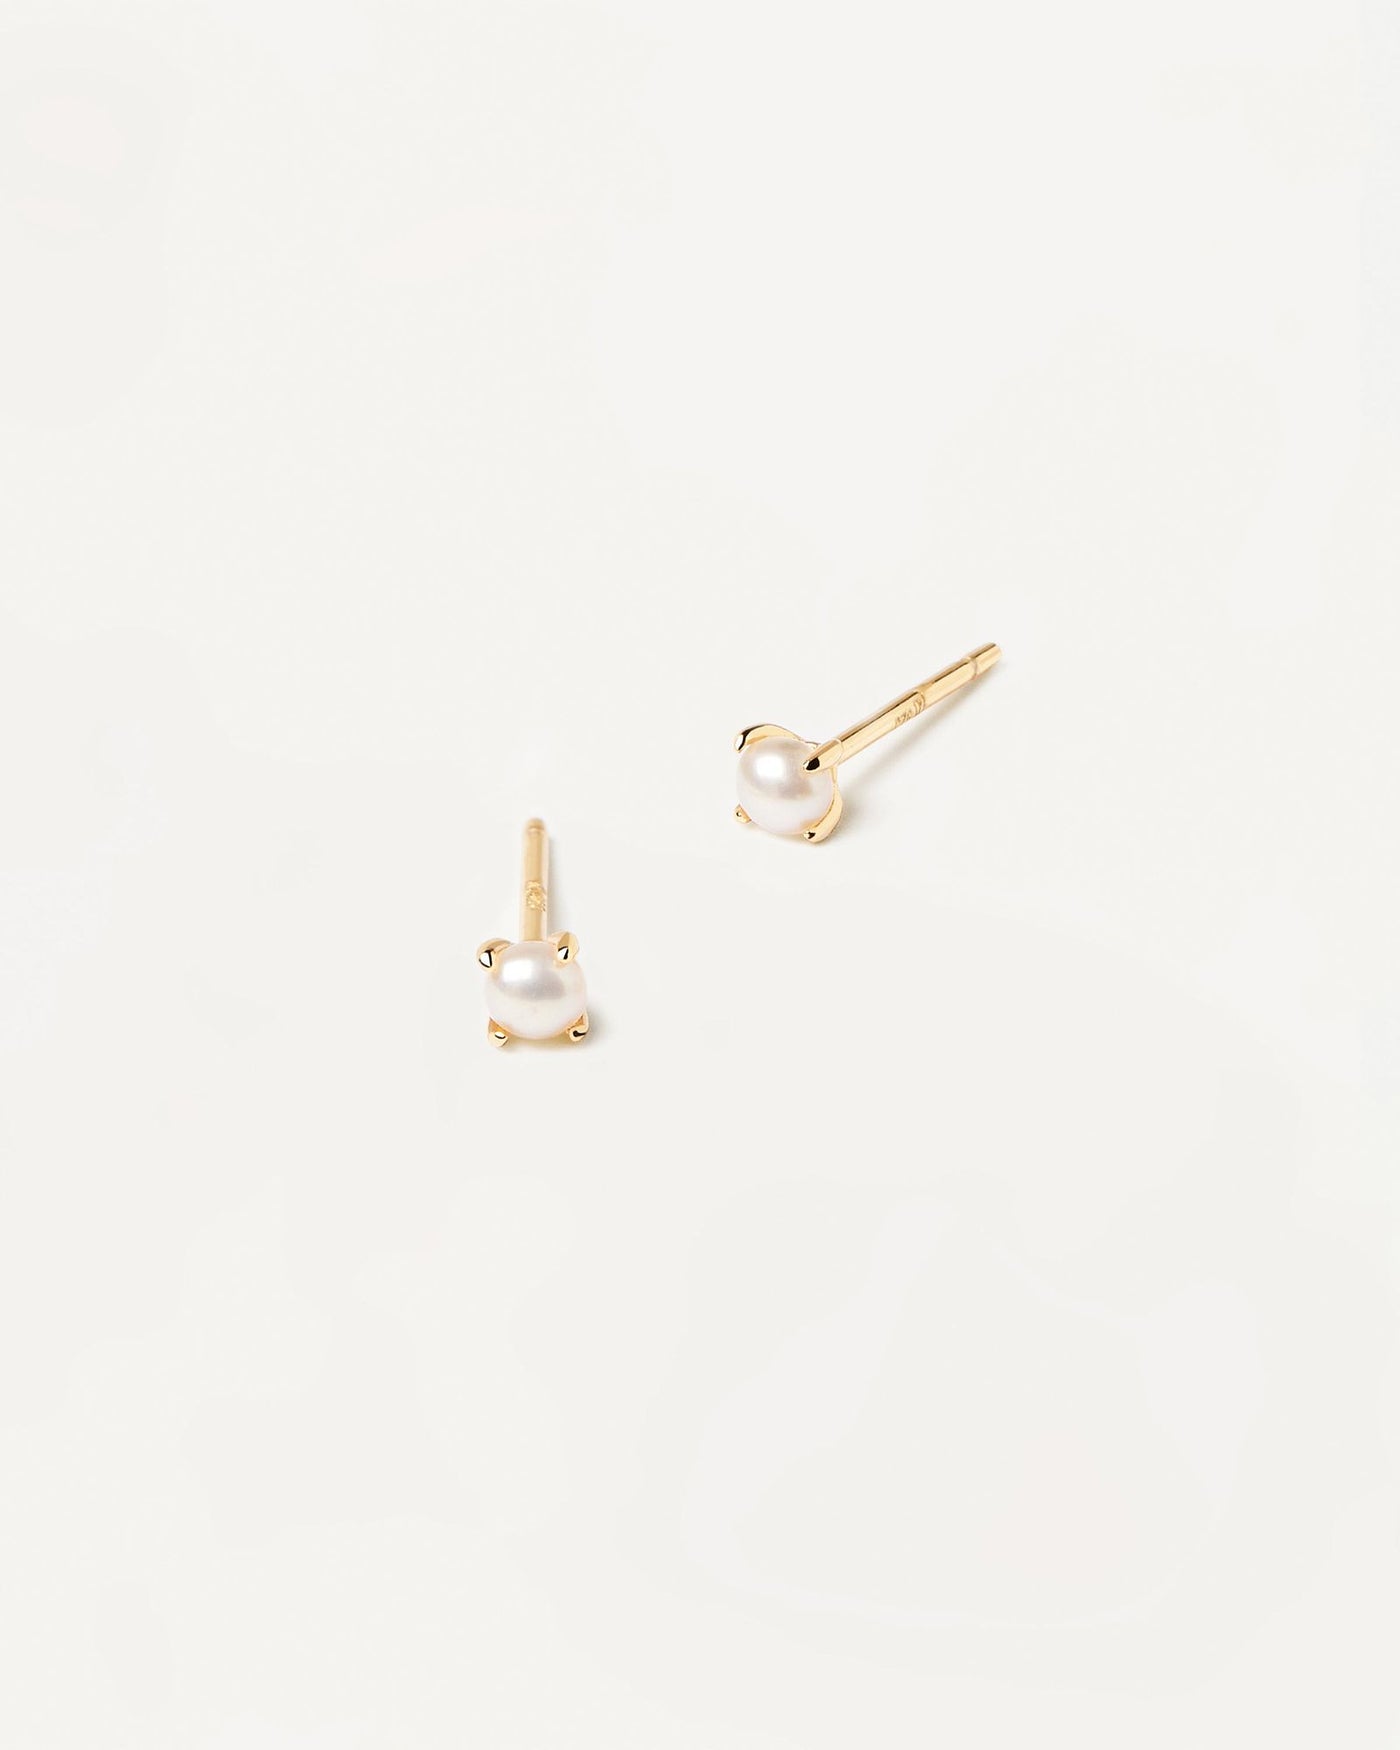 2024 Selection | Solitary Mini Pearl Earrings. Pair of 18k gold plated single small natural pearl studs set on prongs. Get the latest arrival from PDPAOLA. Place your order safely and get this Best Seller. Free Shipping.